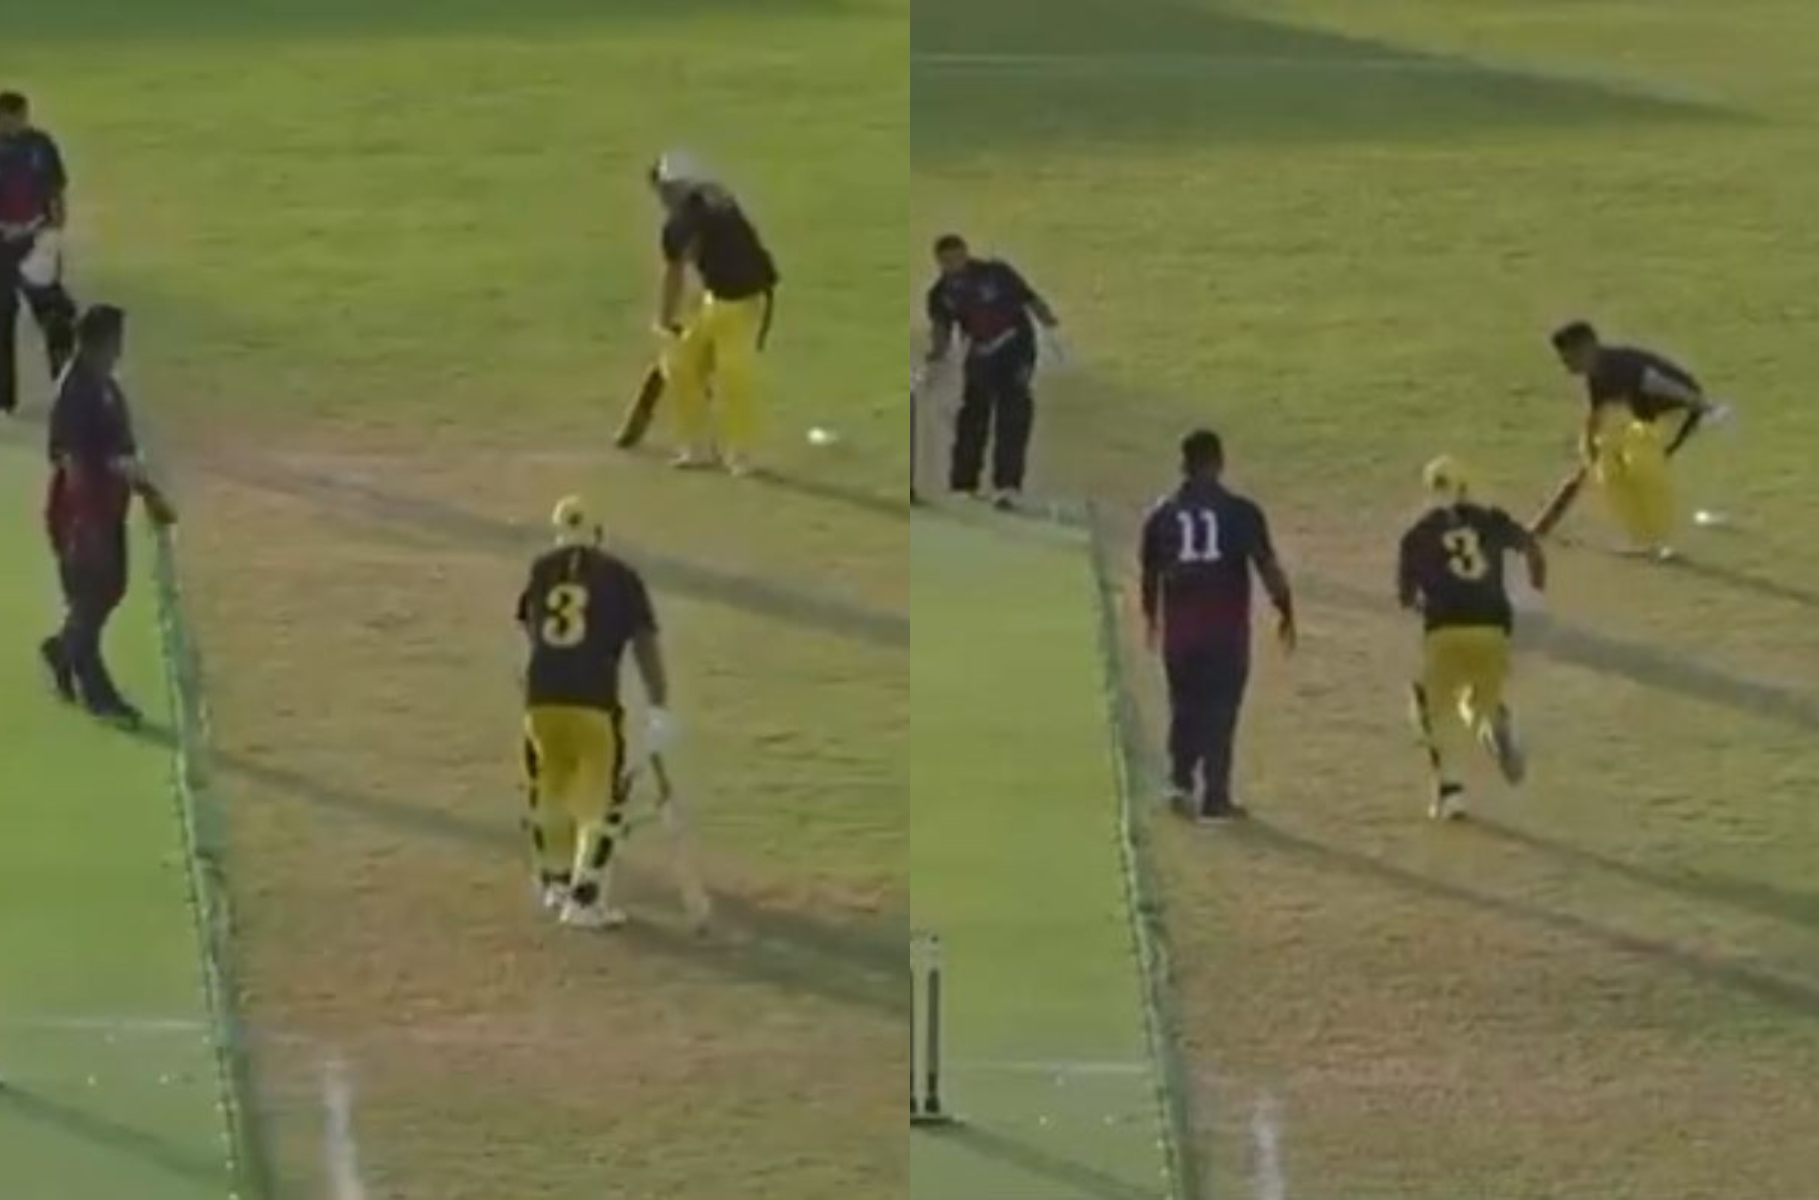 Batsmen stole a second run despite the keeper holding the ball to tie the match | Screengrab